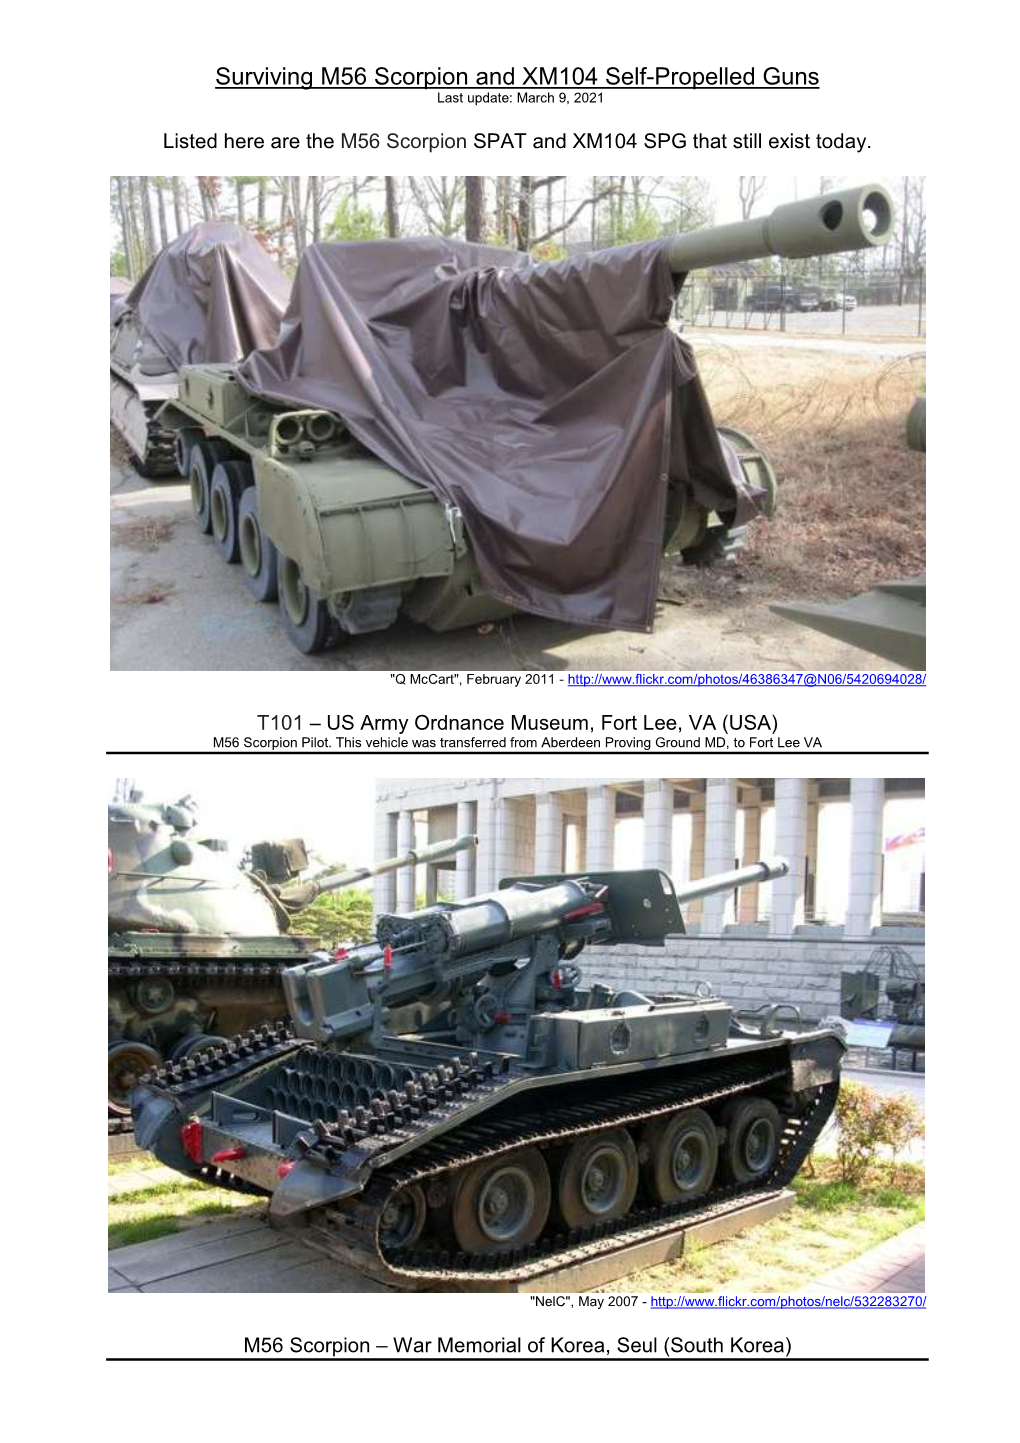 M56 Scorpion and XM104 Self-Propelled Guns Last Update: March 9, 2021